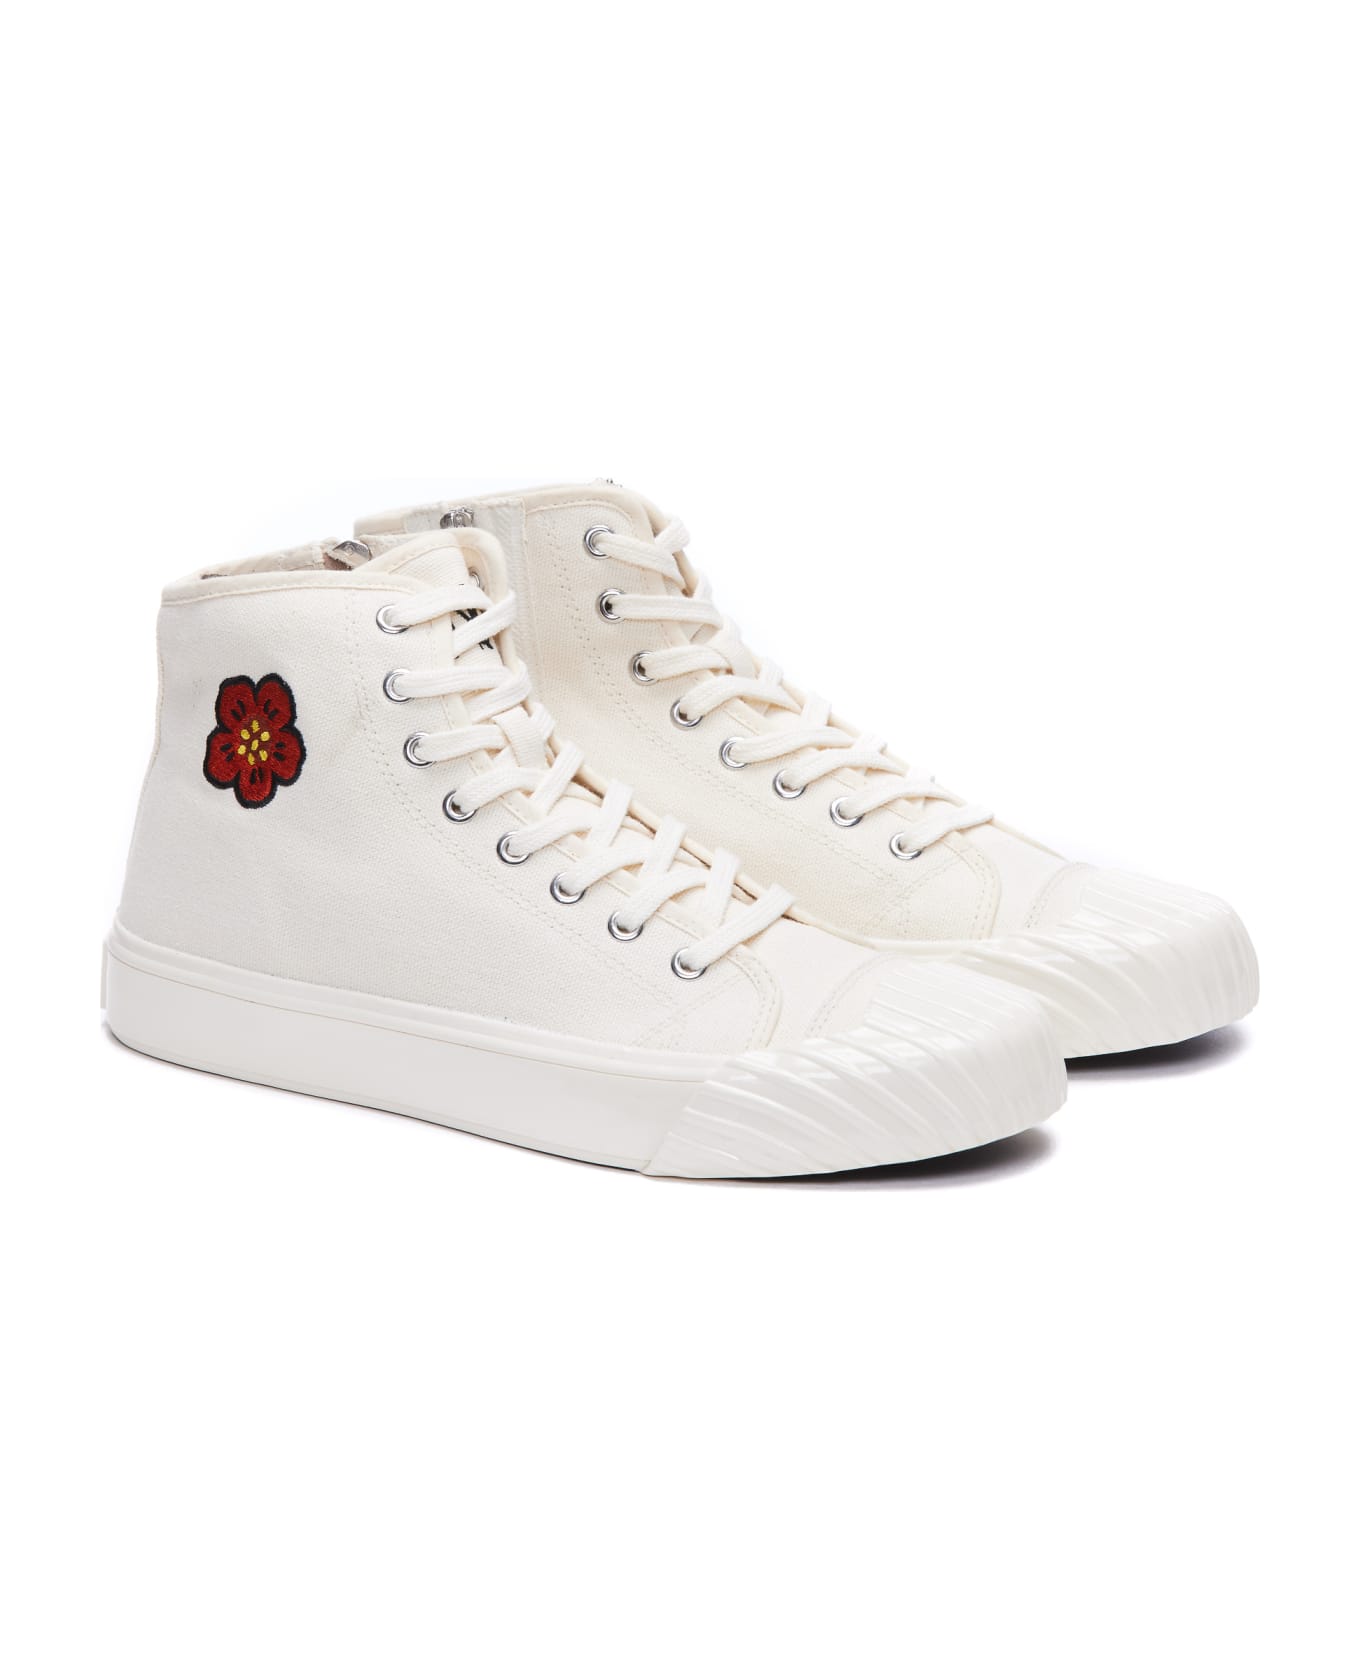 Kenzo school High Top Trainers Sneakers - White